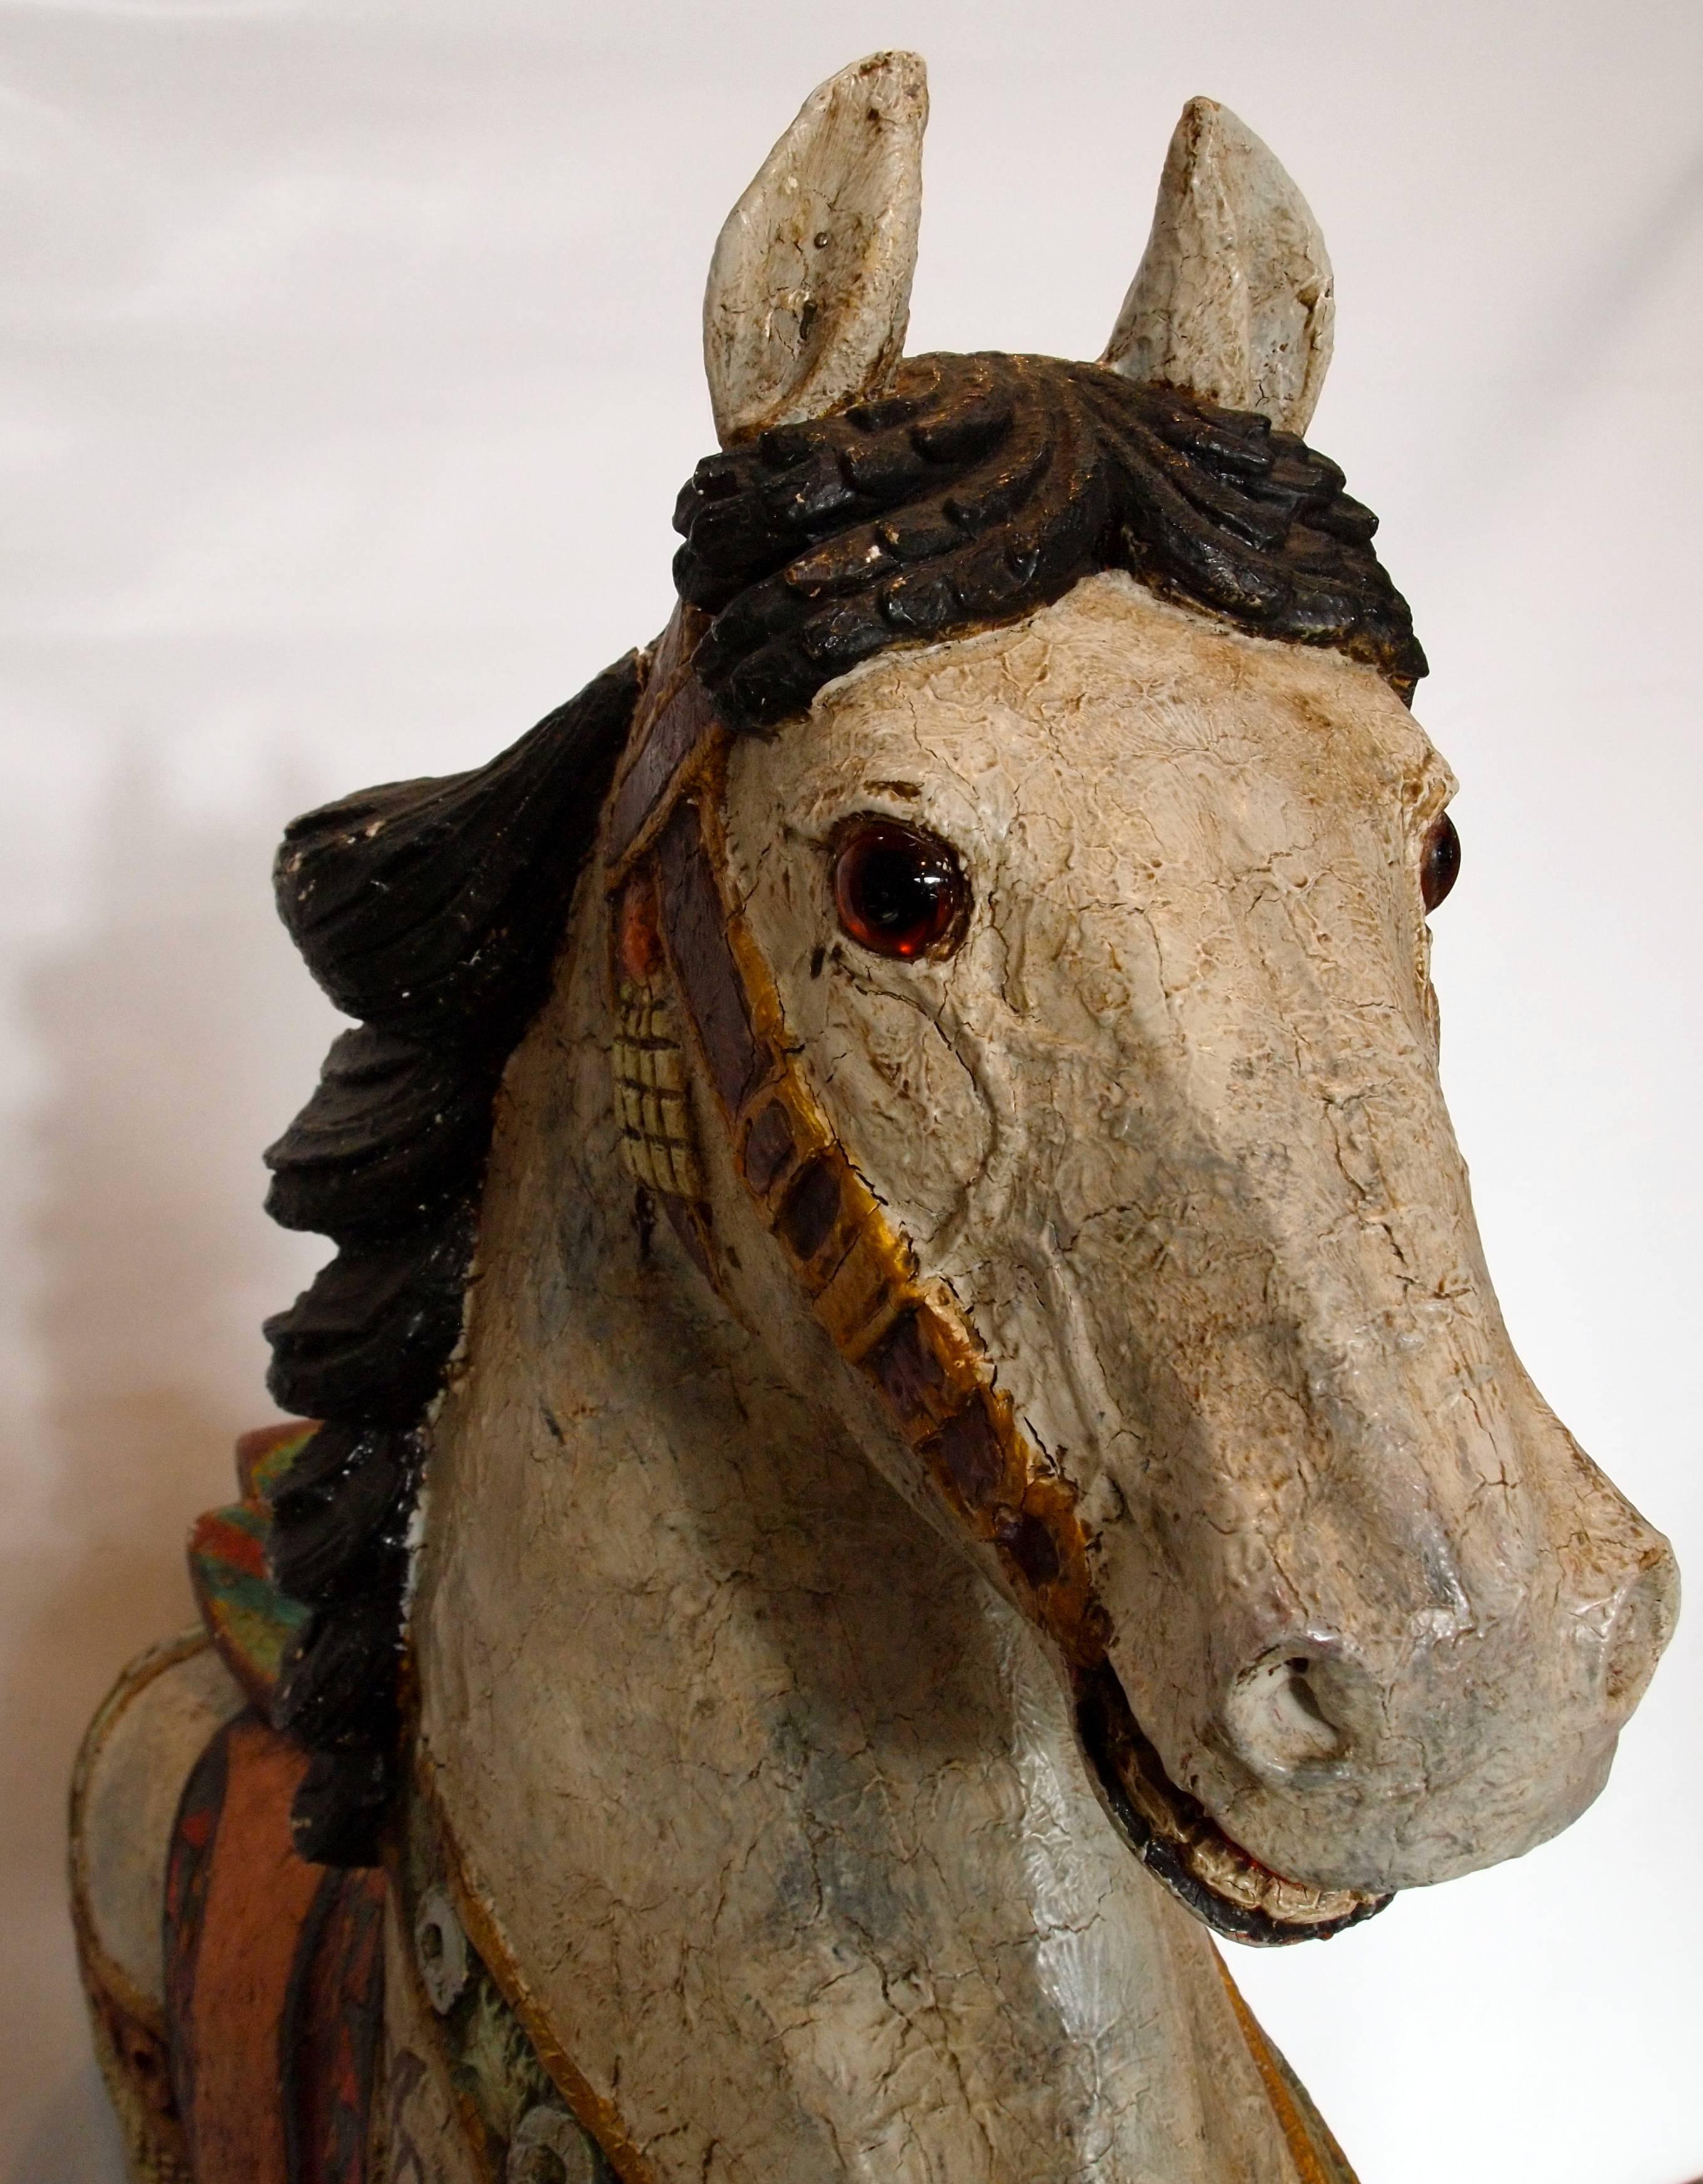 Beautifully painted and carved wood German or French carnival carousel horse 'Apache' with glass eyes and an expressive face from the late 19th to early 20th century.